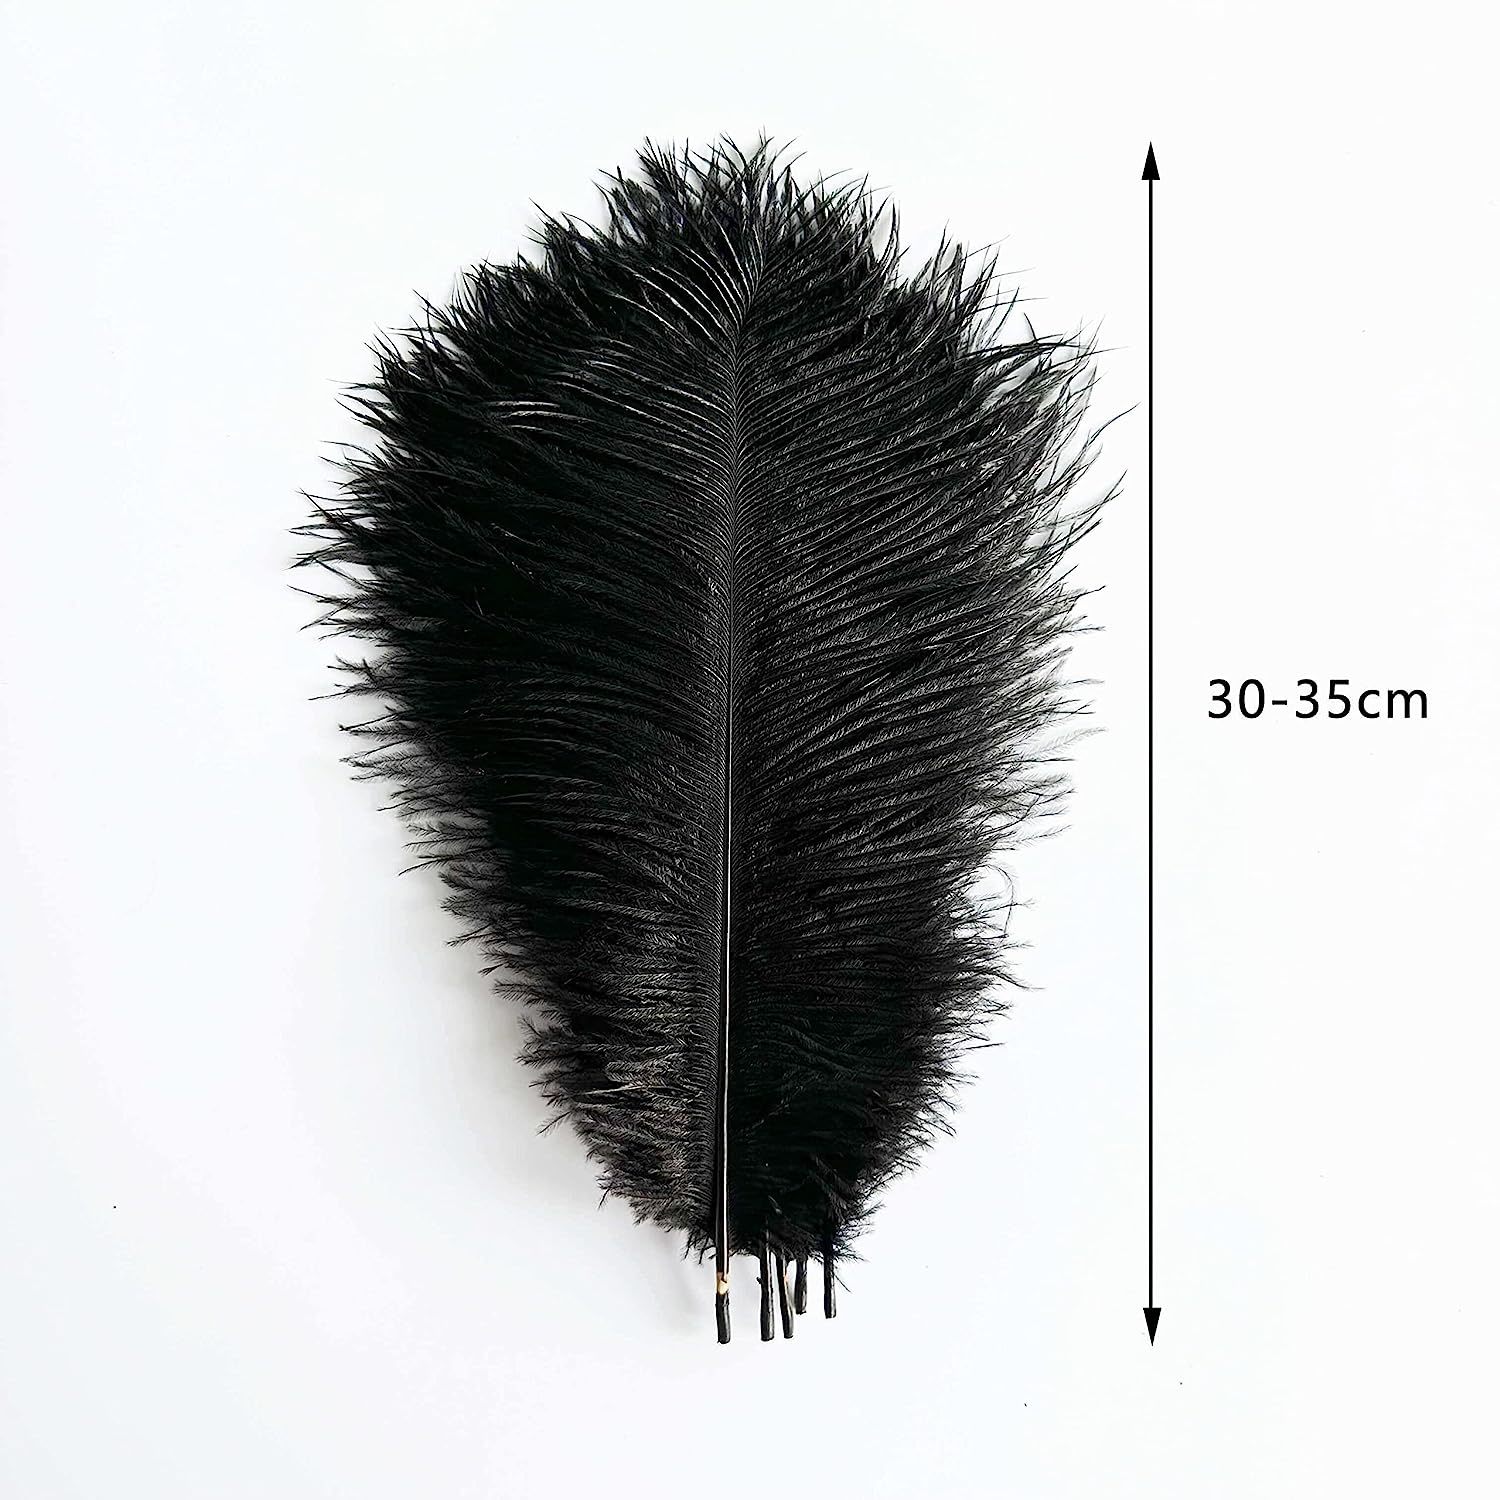 400 Pcs Feathers For Crafts, Ideal For Wedding Ornament, Halloween Mask  Making, Diy Feather Boa, Dream Catcher